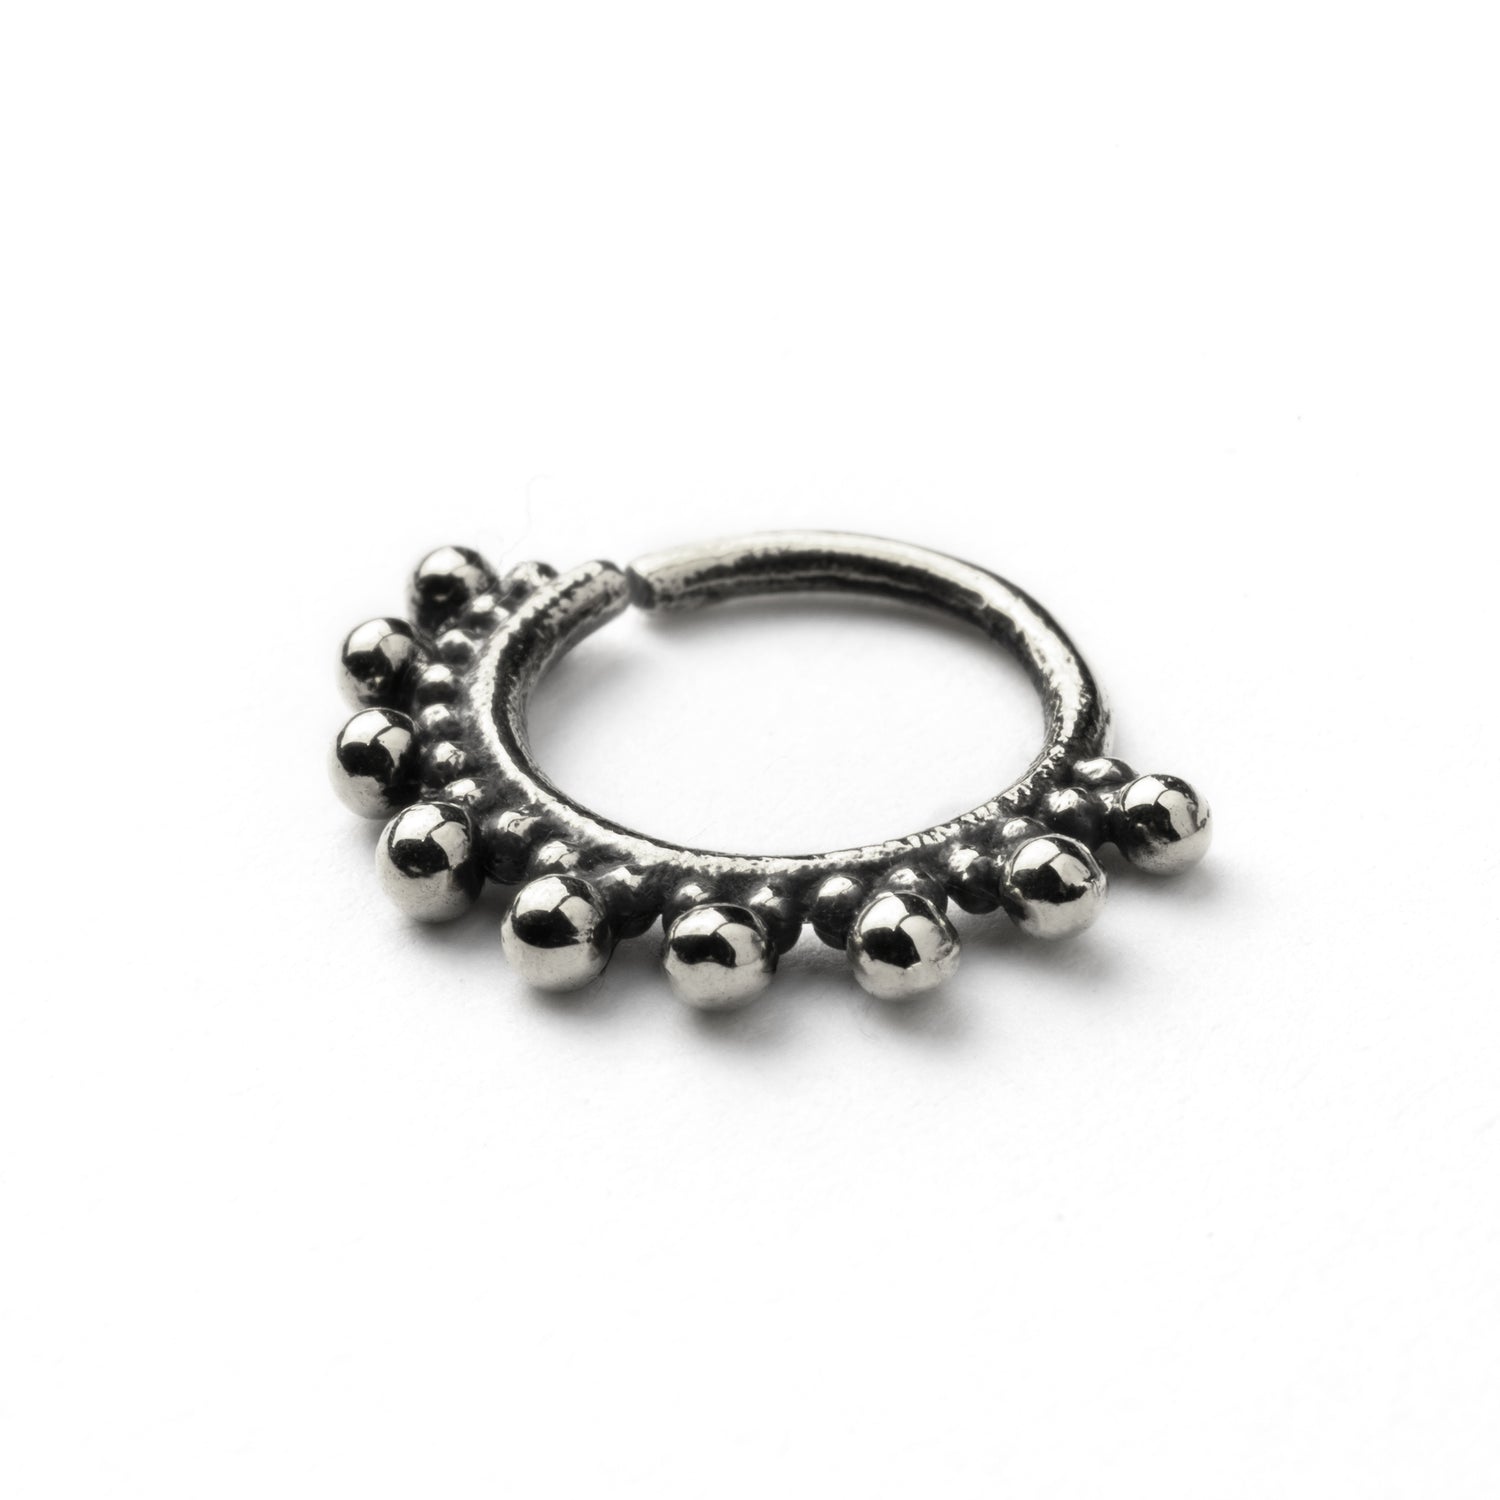 Indira silver septum ring side view